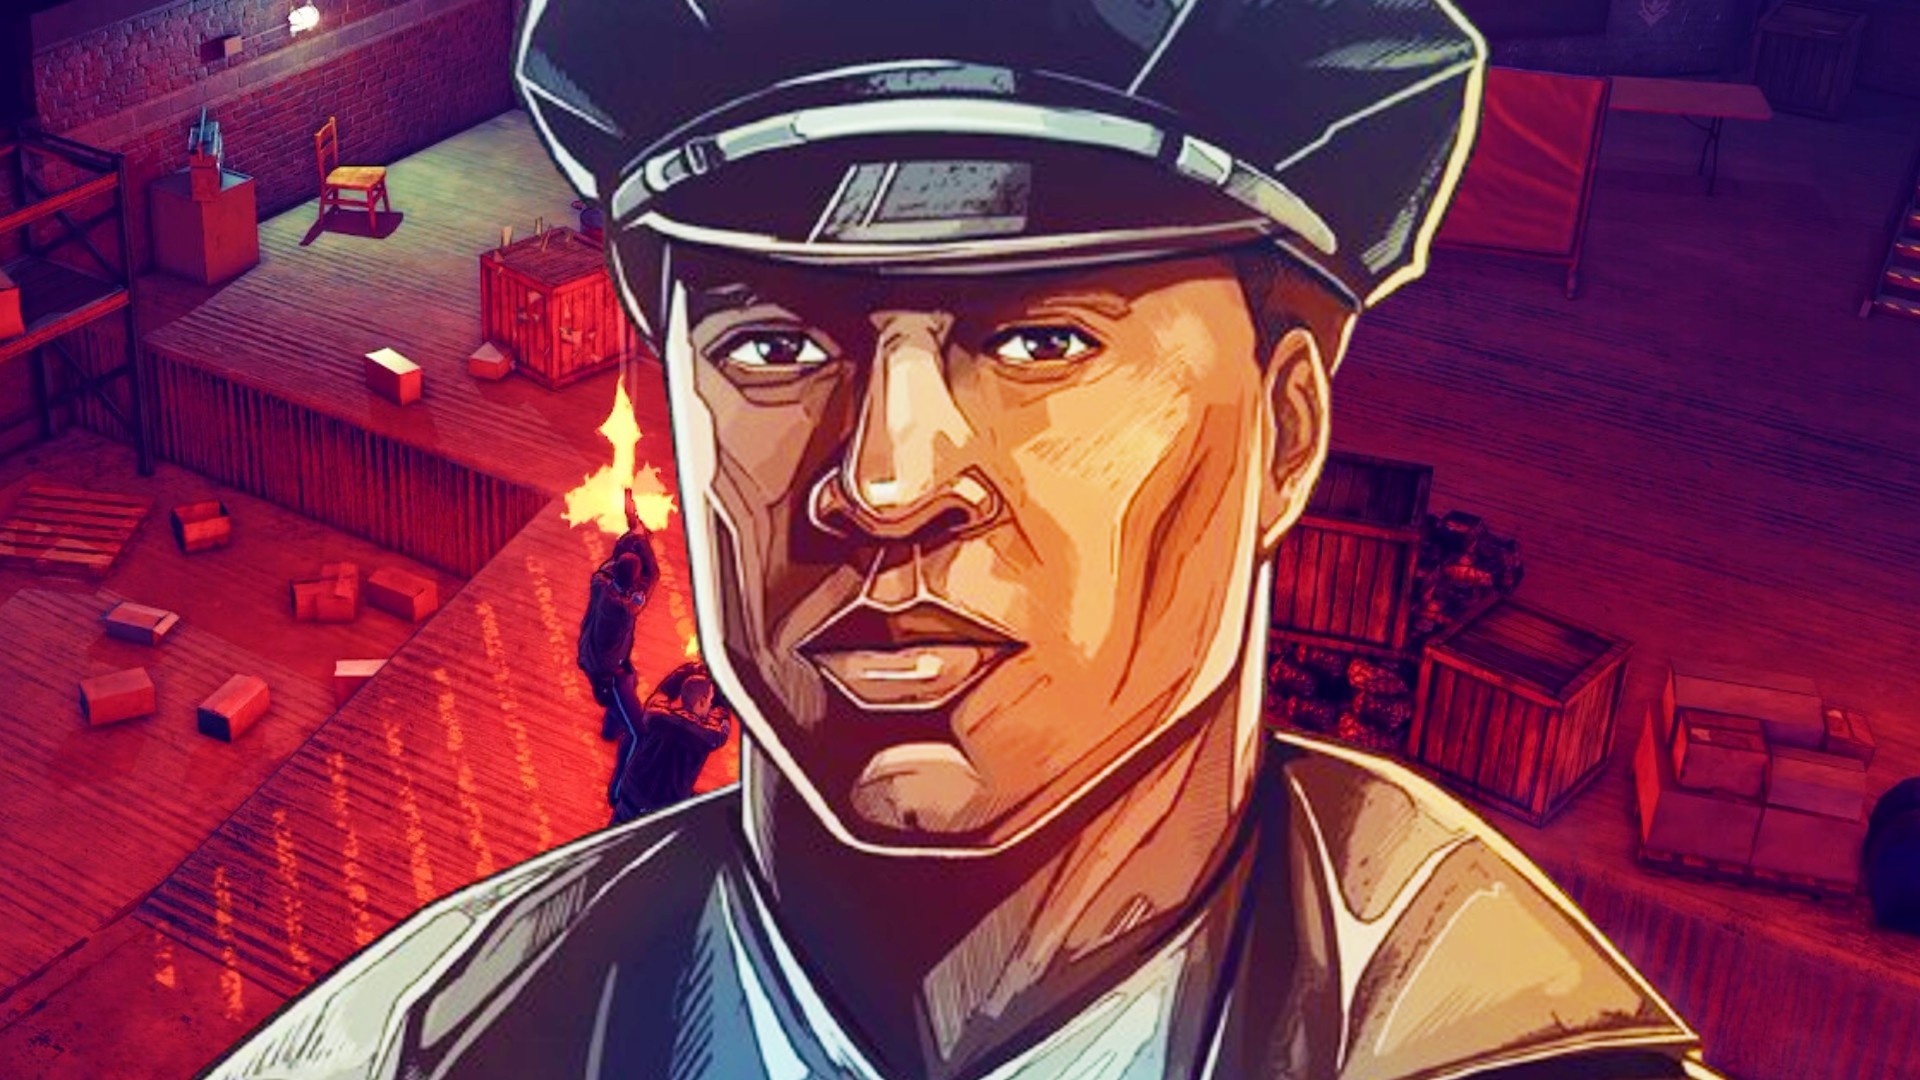 GTA 6 is coming, but another crime game is perfect for the meantime